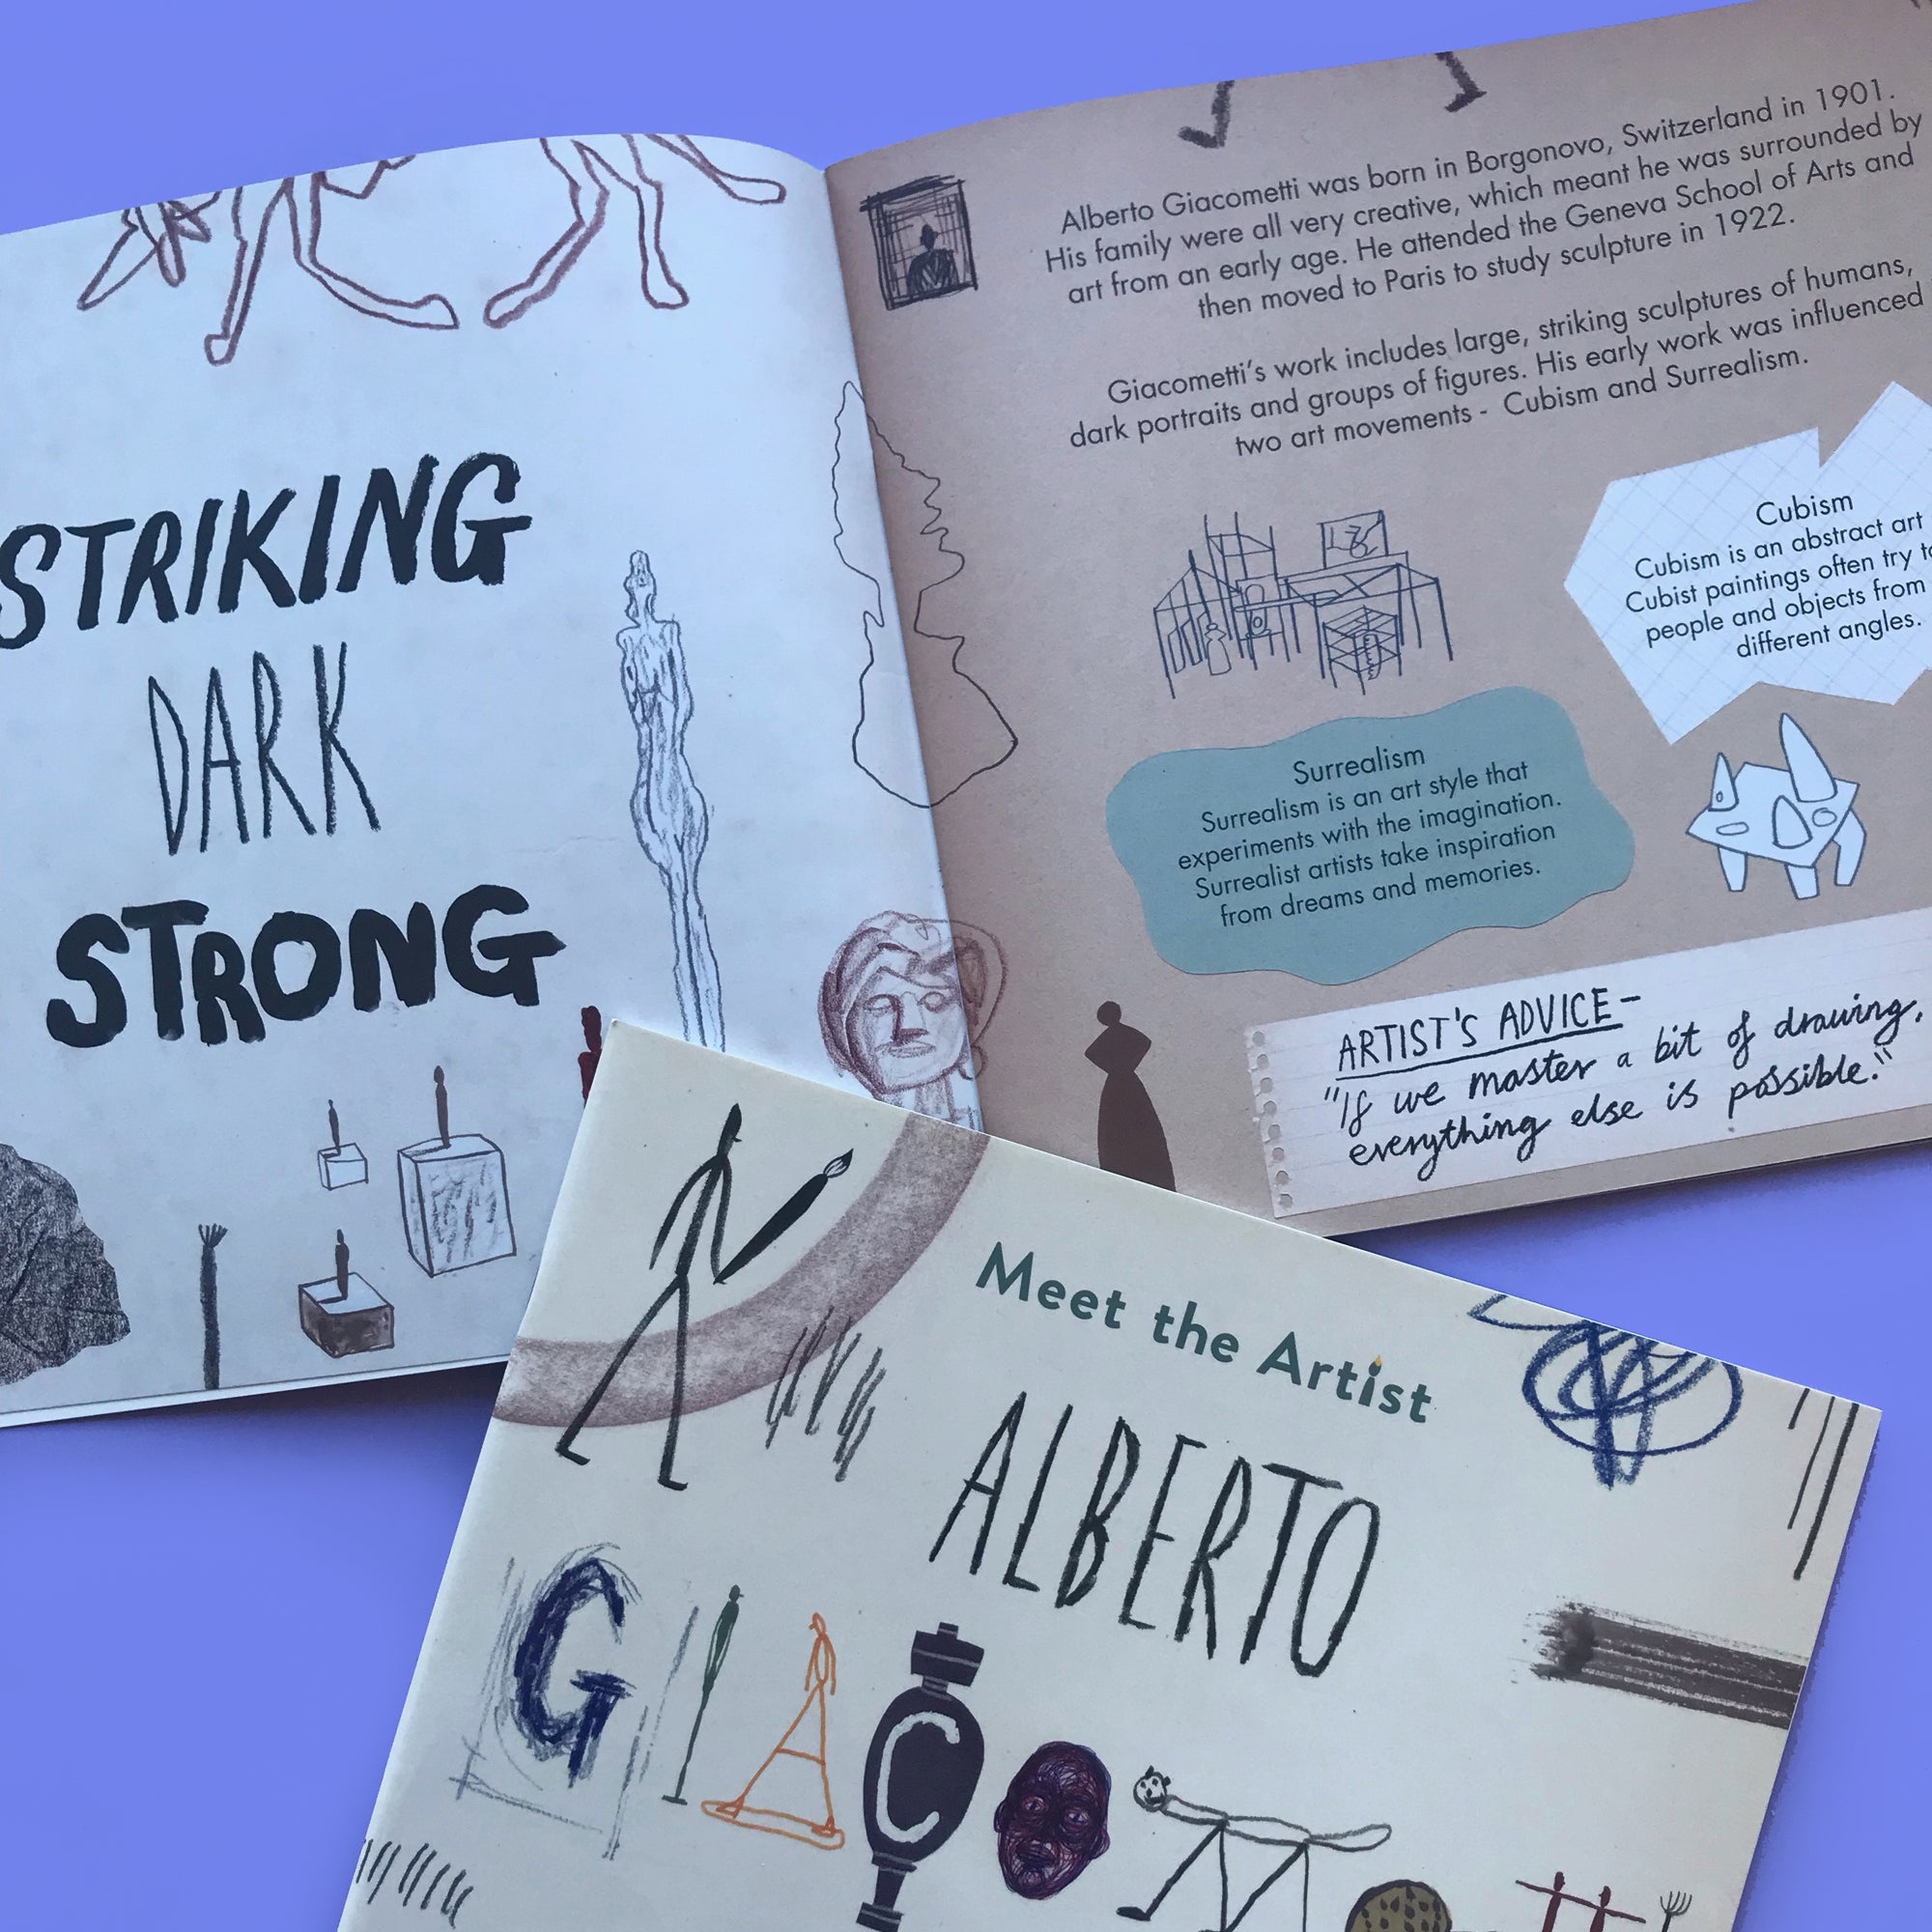 ART & CRAFT BOOKS FOR EVERYONE - Mini Mad Things